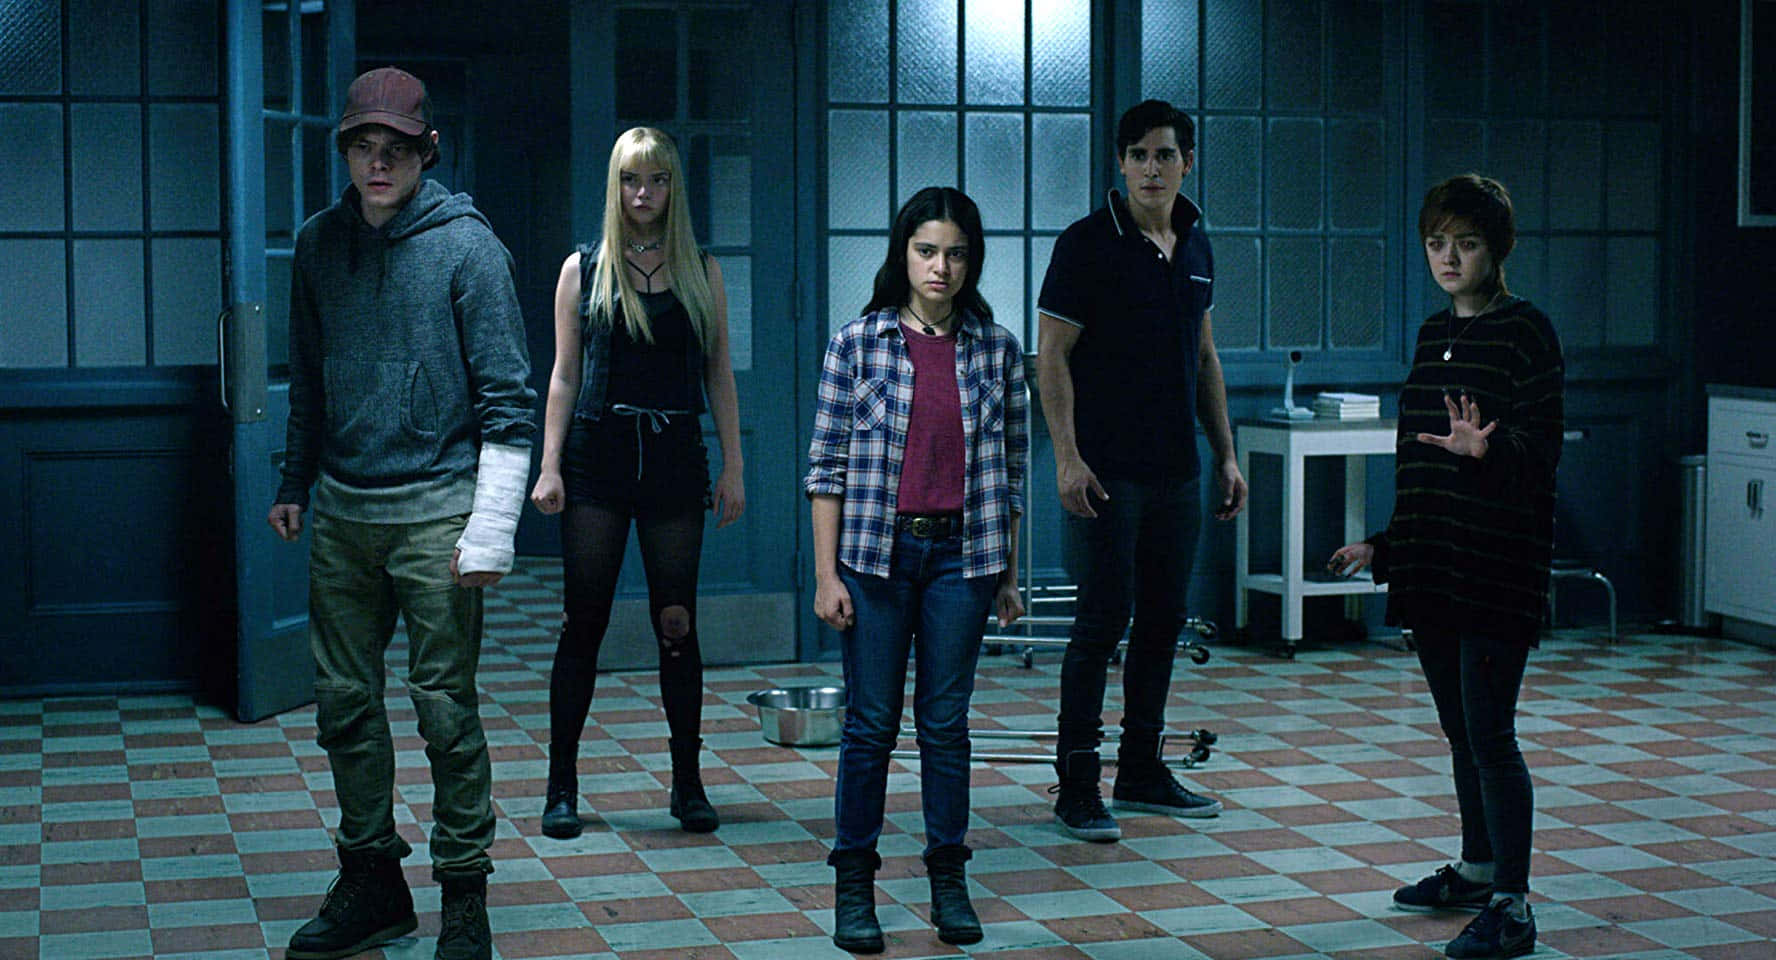 The New Mutants team standing together in a powerful stance. Wallpaper